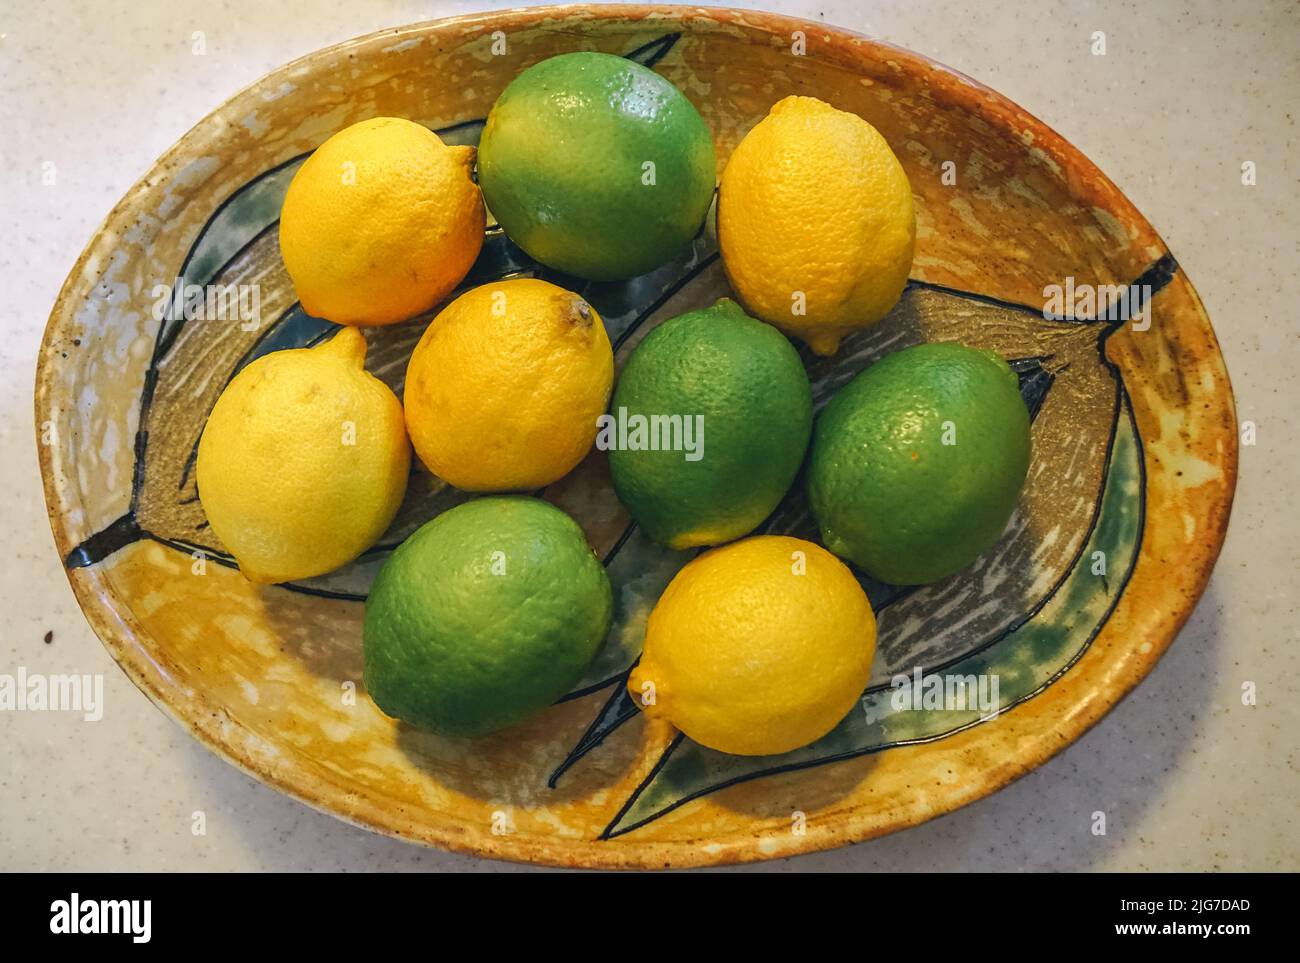 Citrus fruit sit in a patterned wooden oval bowl. Stock Photo